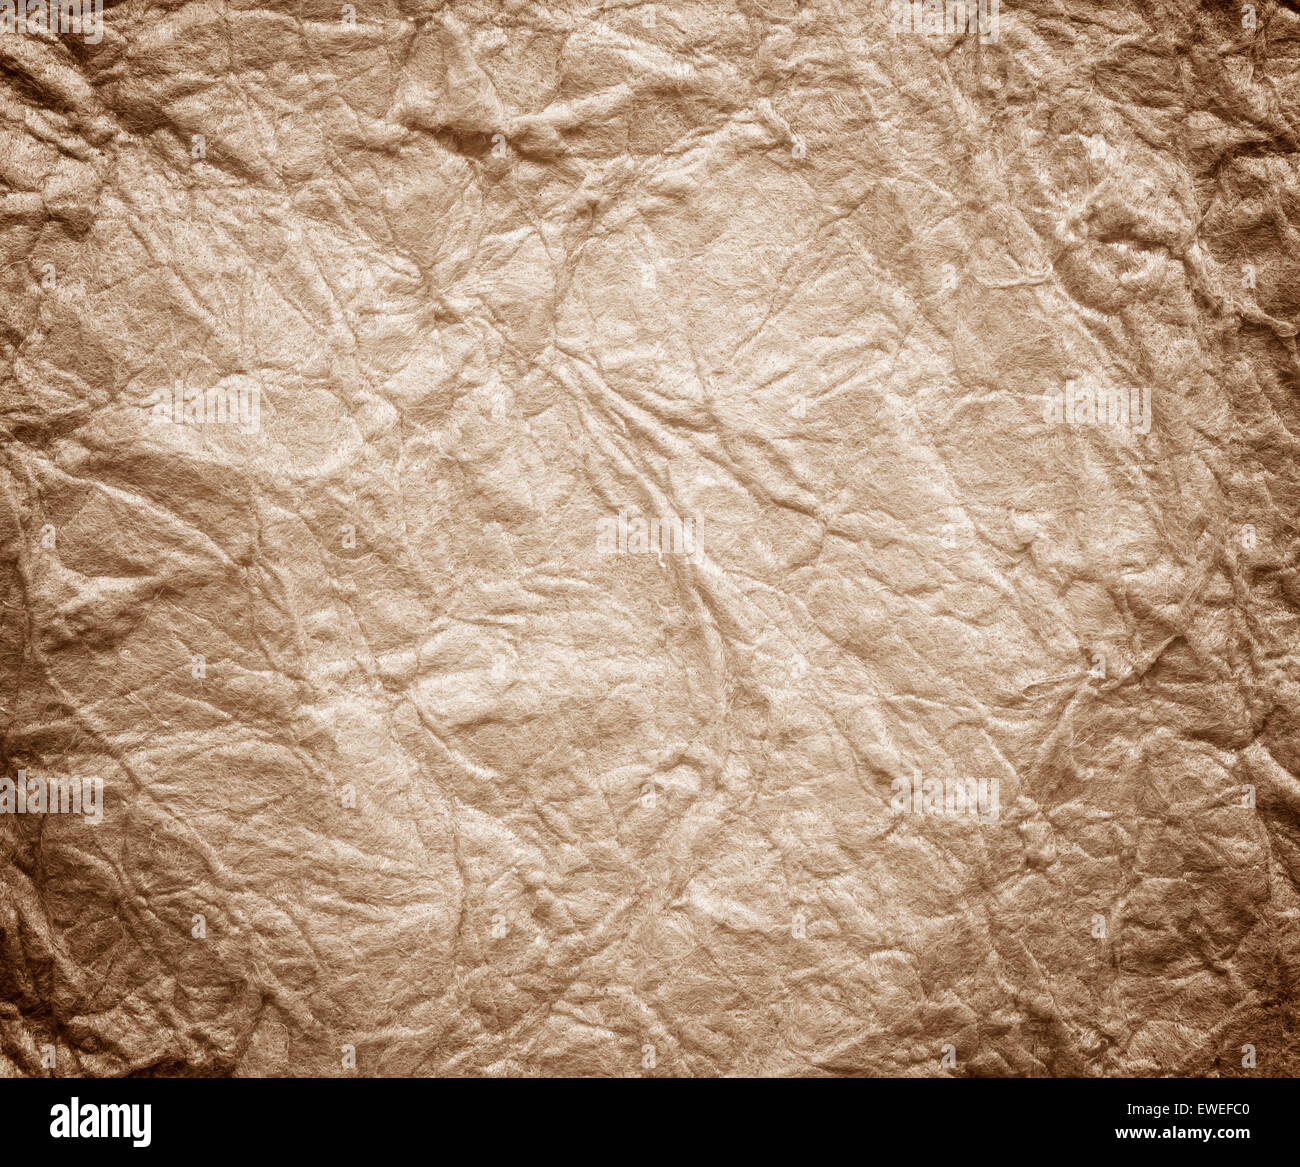 Paper texture brown paper sheet. Sheets of crumpled paper Stock Photo